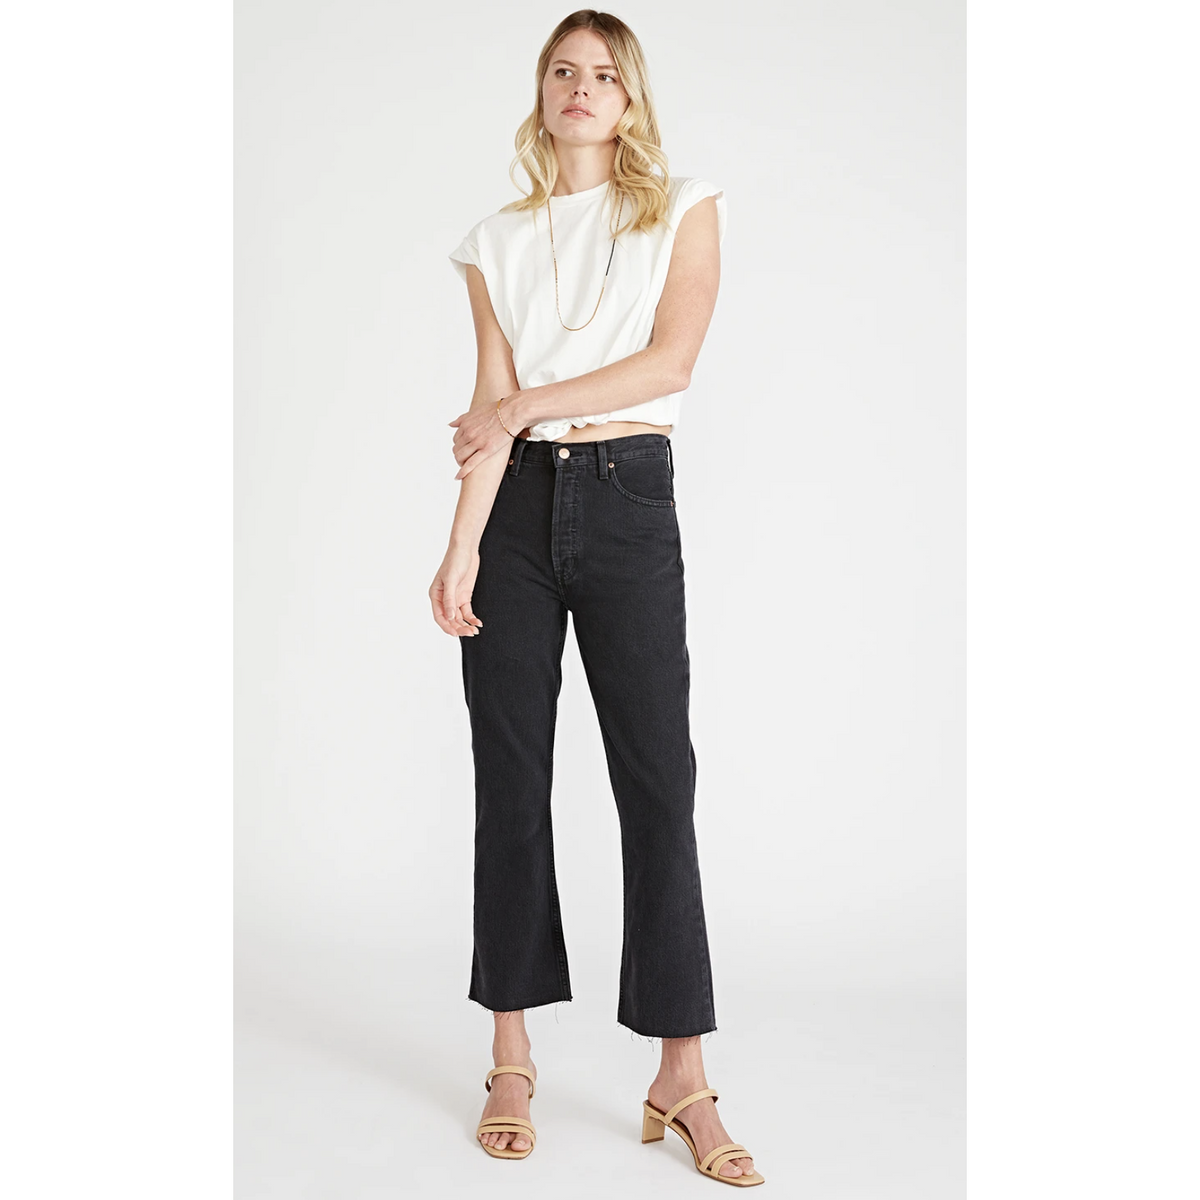 Etica - Sustainable - Josie High Rise Crop Flare - Obsidian